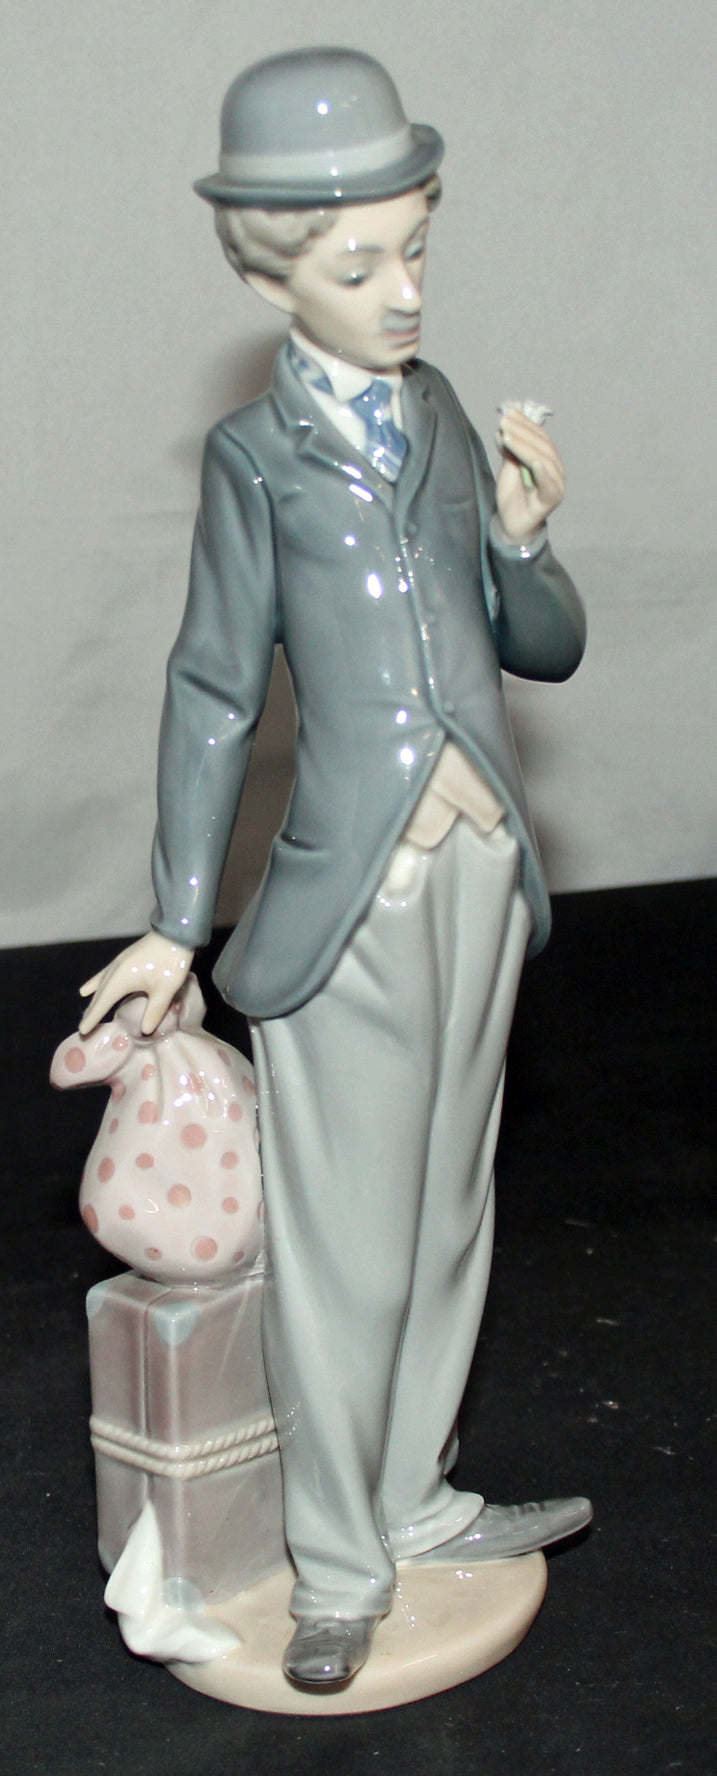 Lladro Figurine: 5233 Charlie The Tramp - As Is